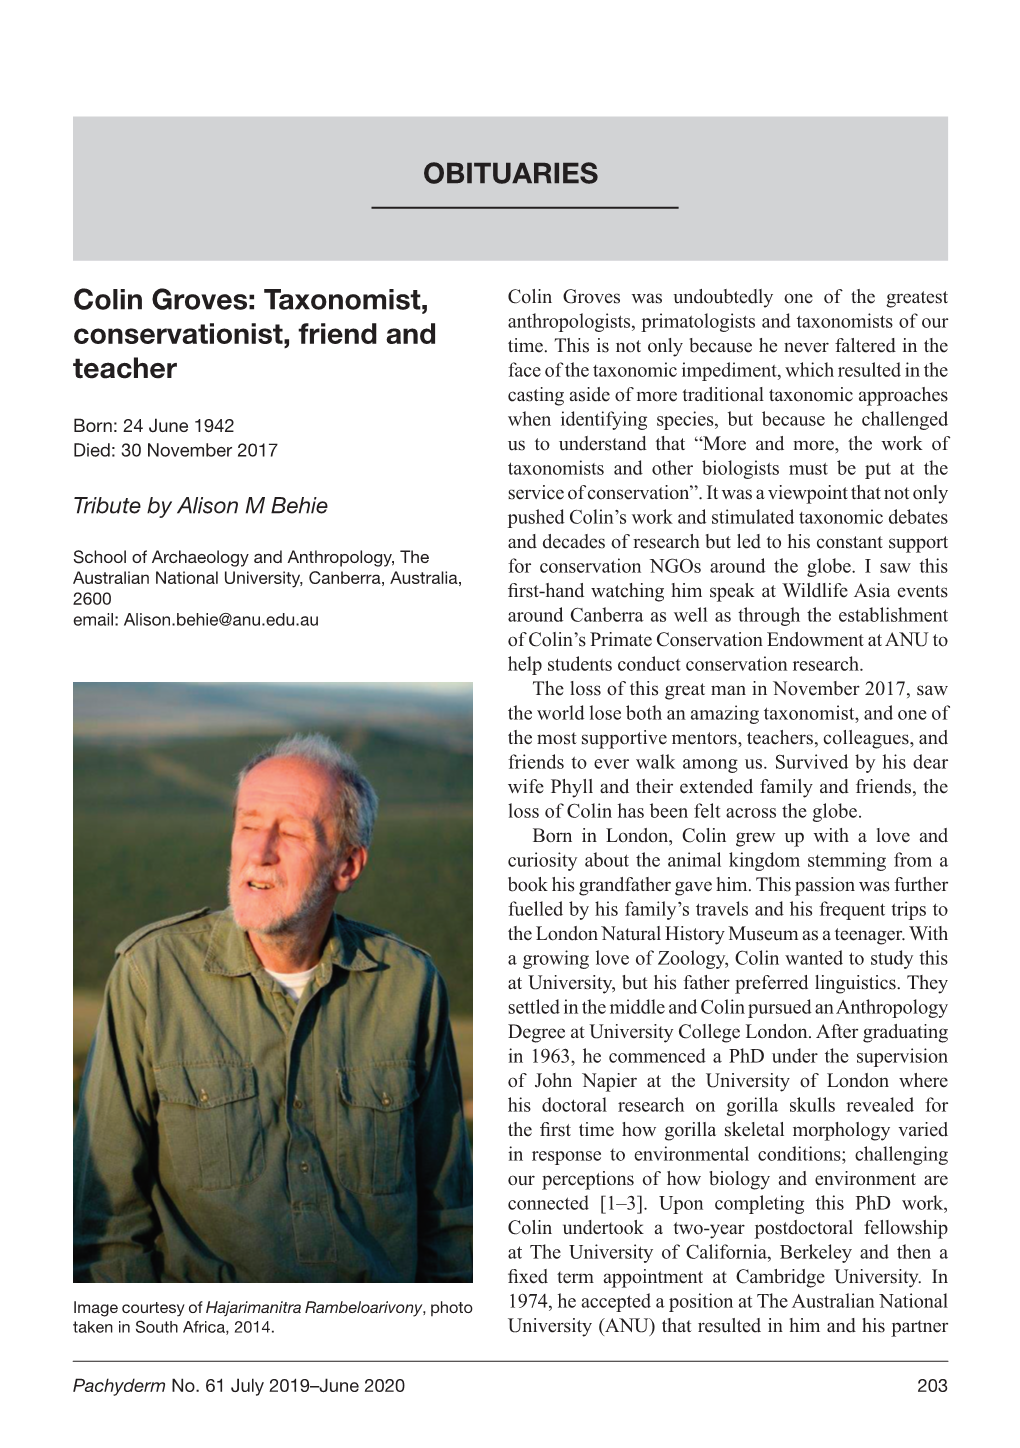 Colin Groves: Taxonomist, Colin Groves Was Undoubtedly One of the Greatest Anthropologists, Primatologists and Taxonomists of Our Conservationist, Friend and Time